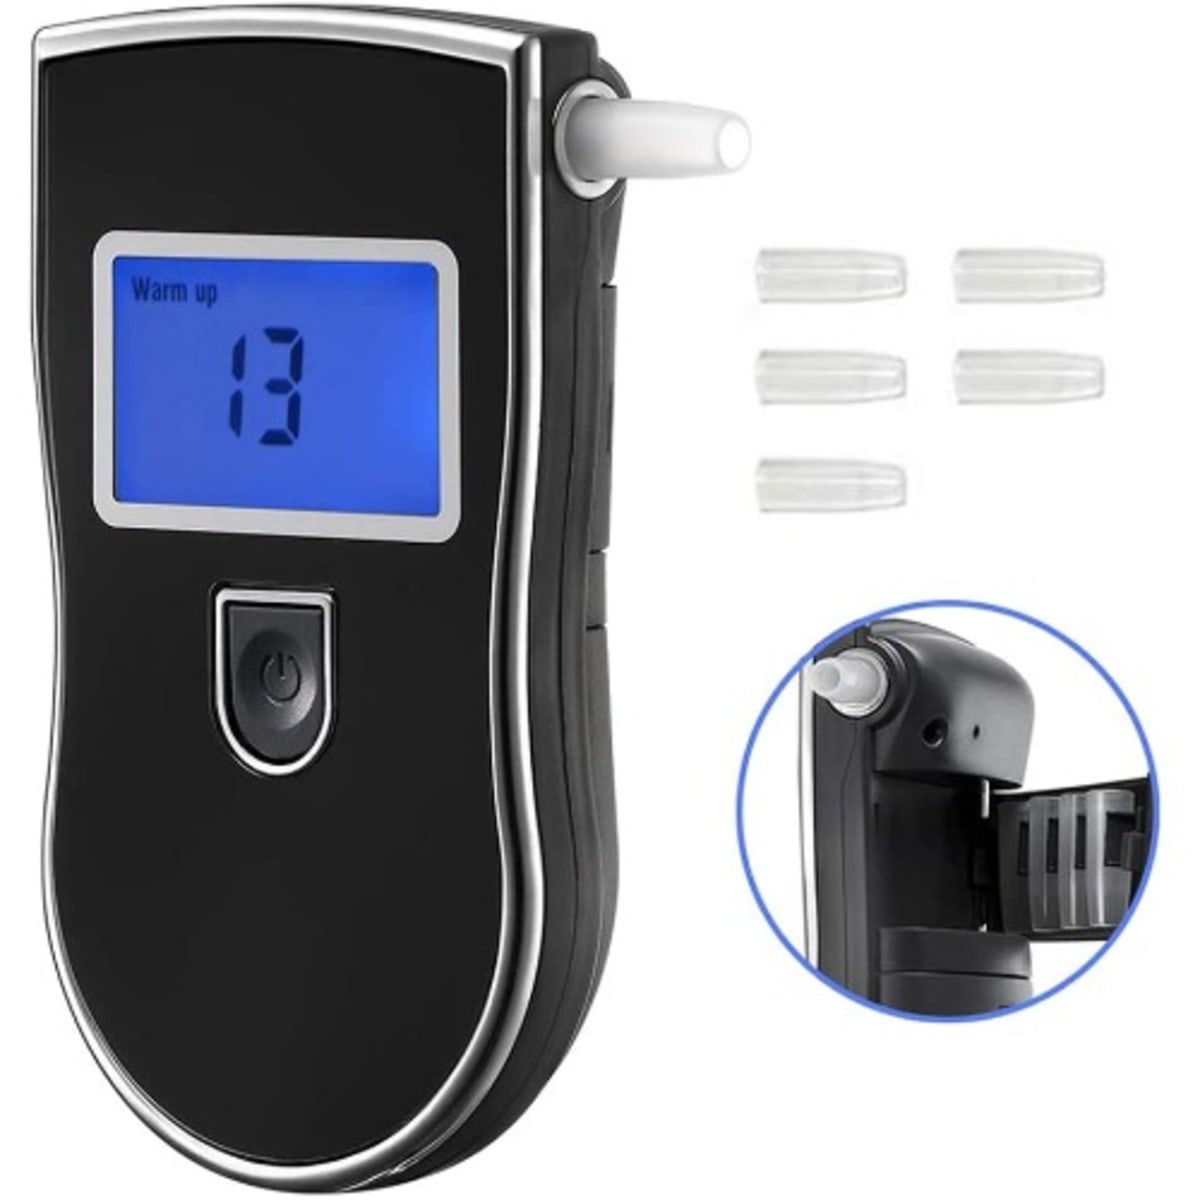 Breathalyzer - Accurate Detection Portable Breath Alcohol Tester